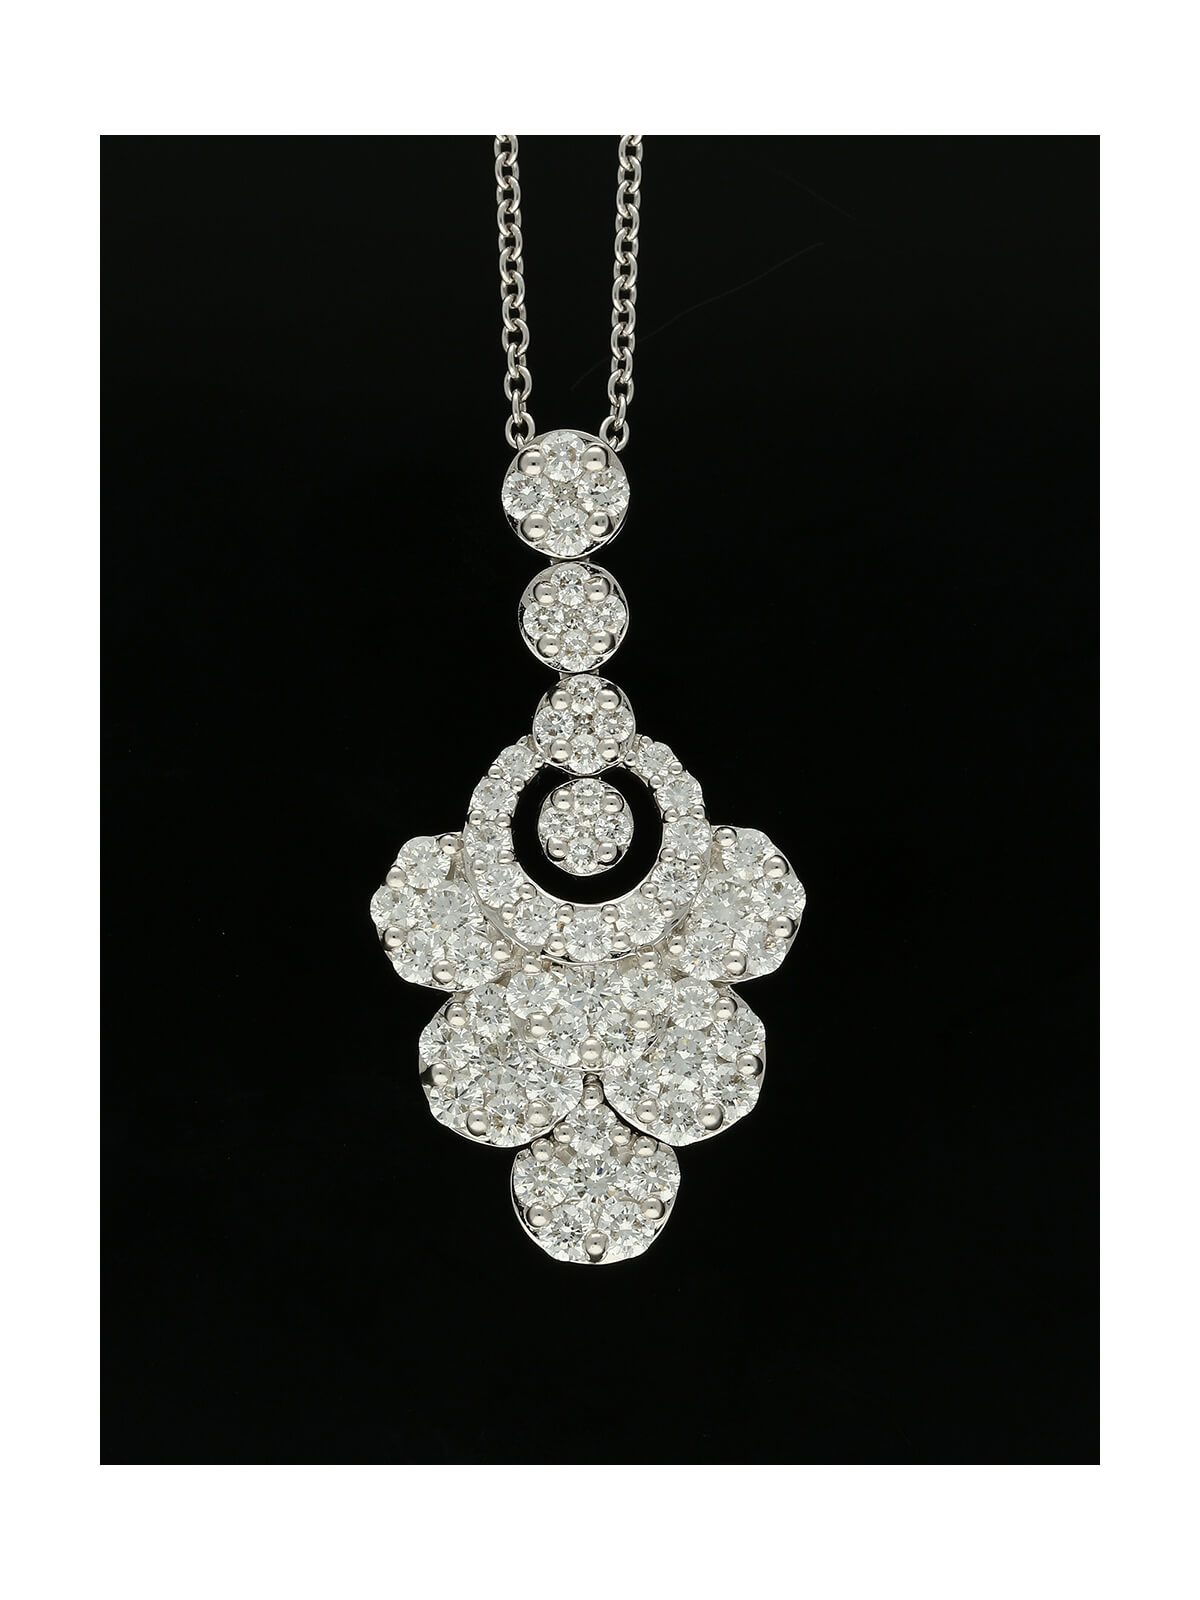 Diamond Chandelier Drop Pendant Necklace in 18ct White Gold